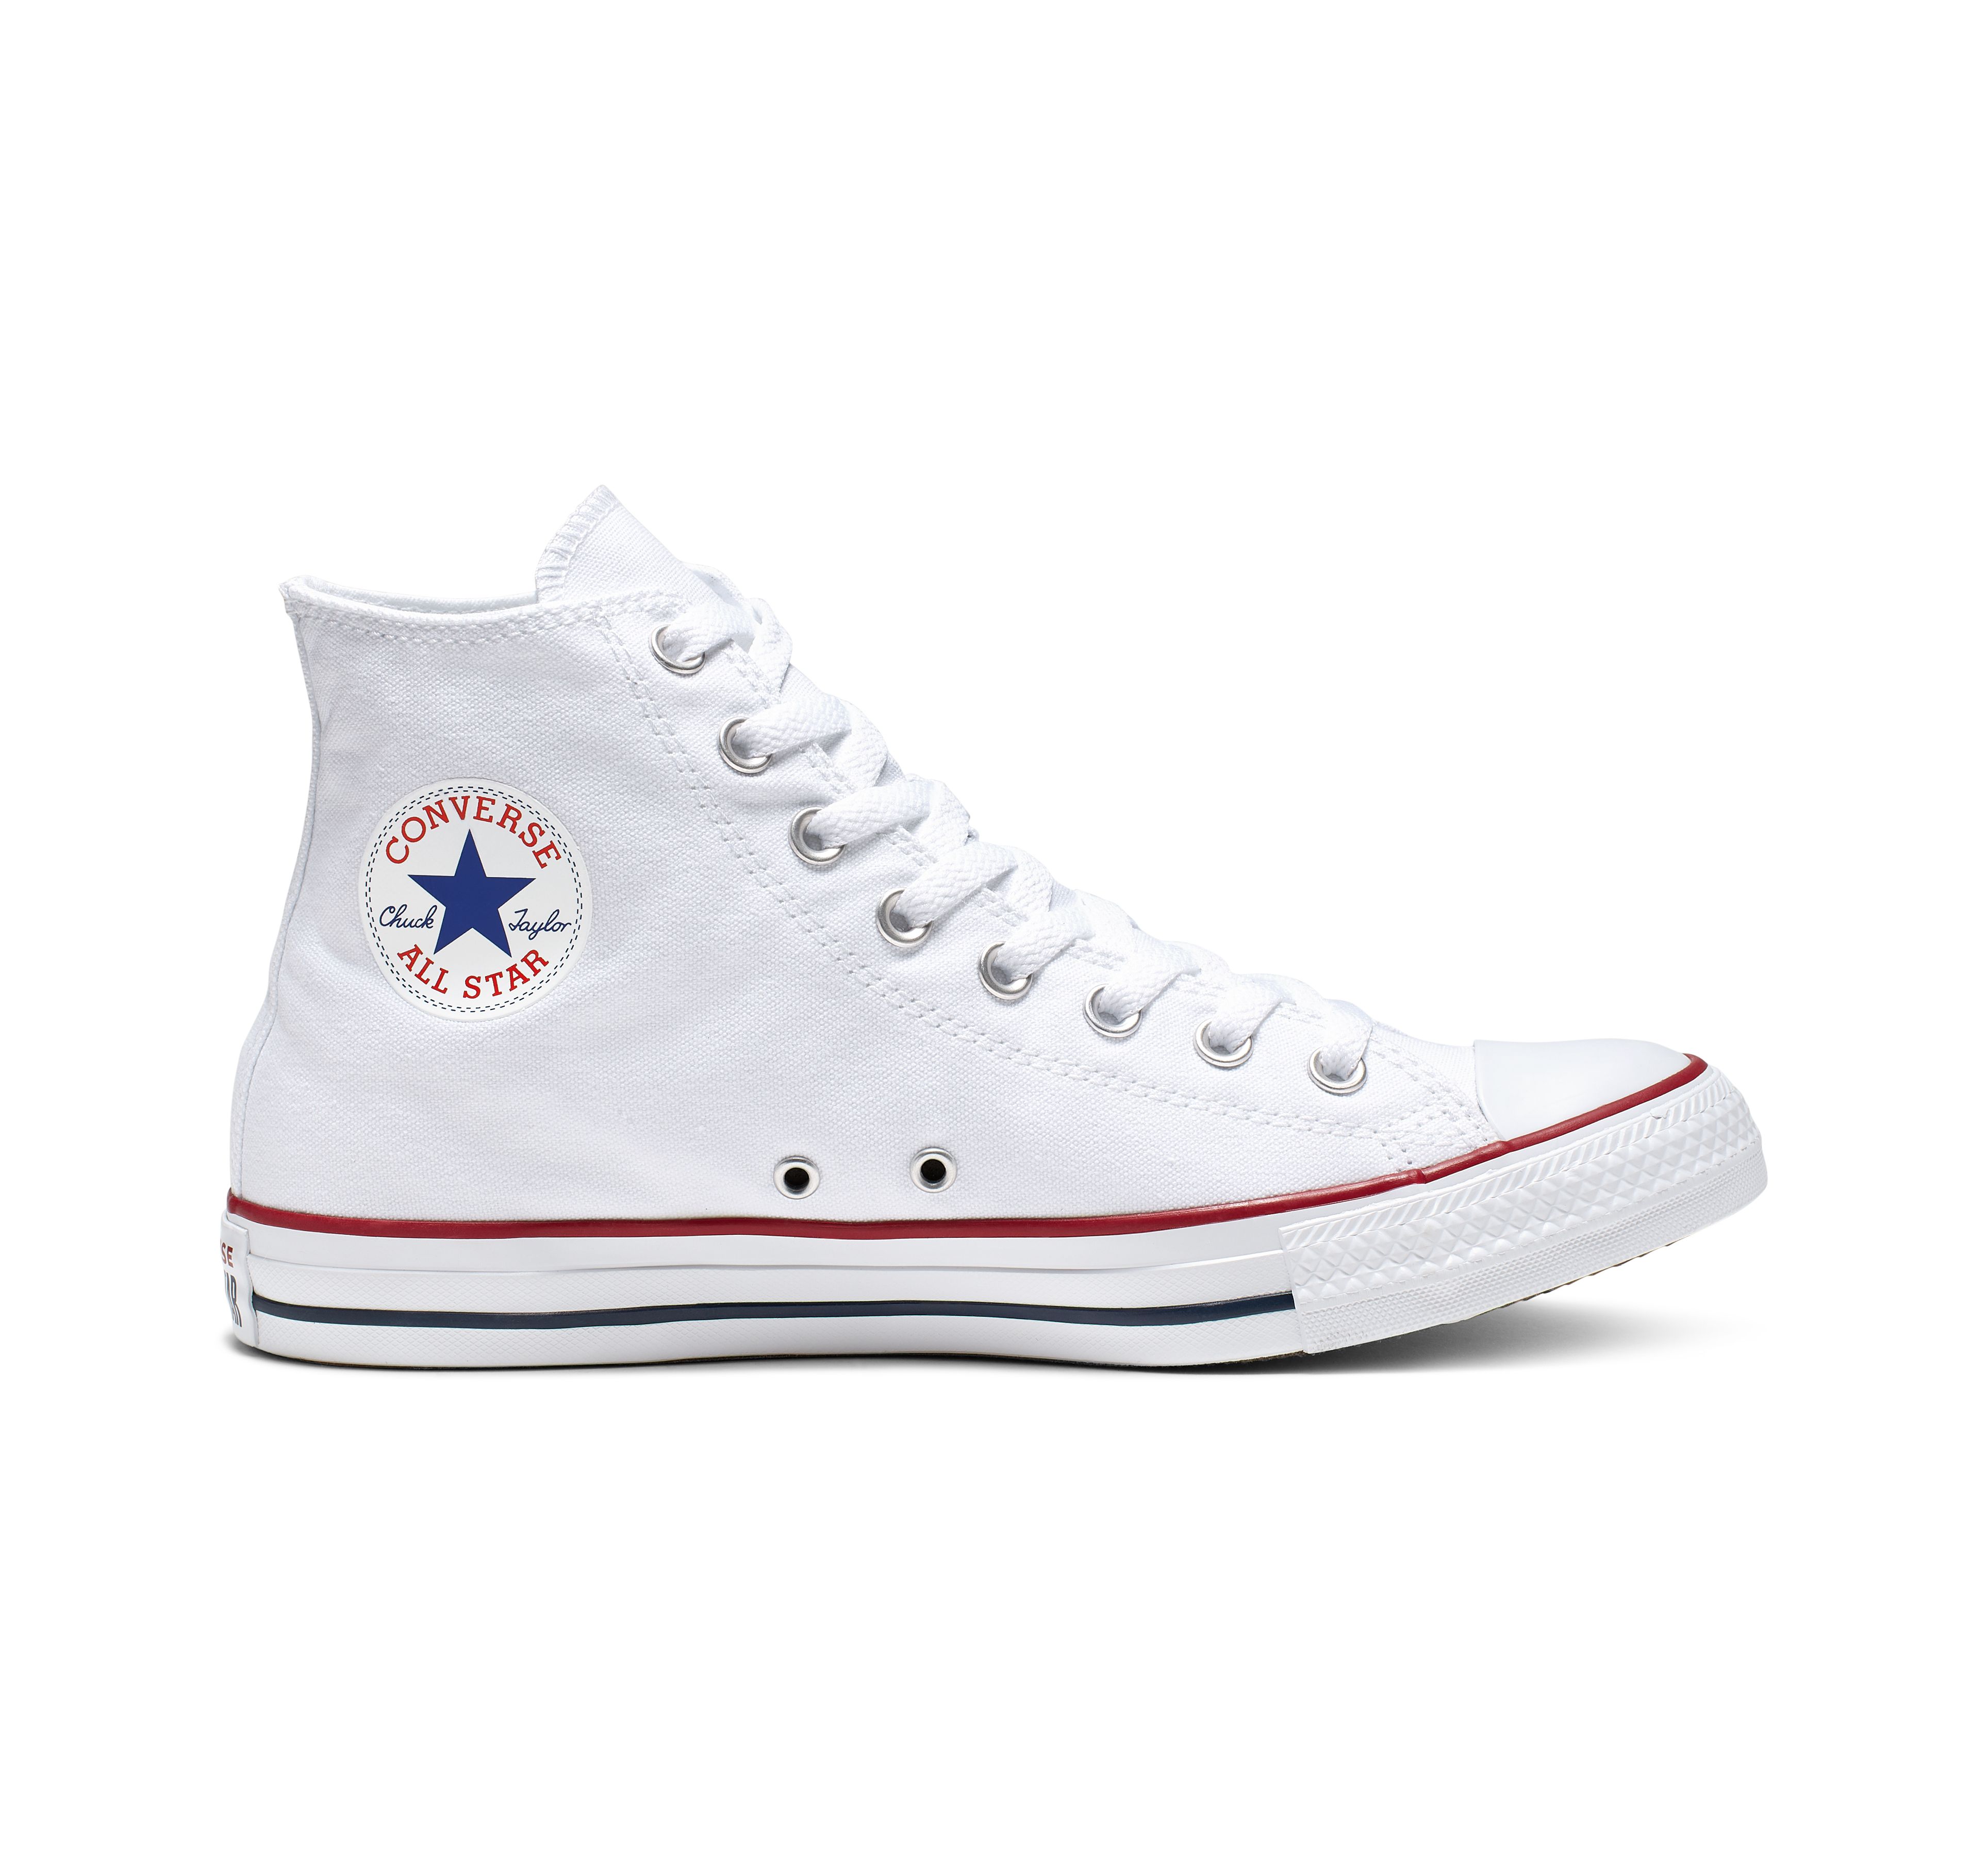 converse shoes price in sm